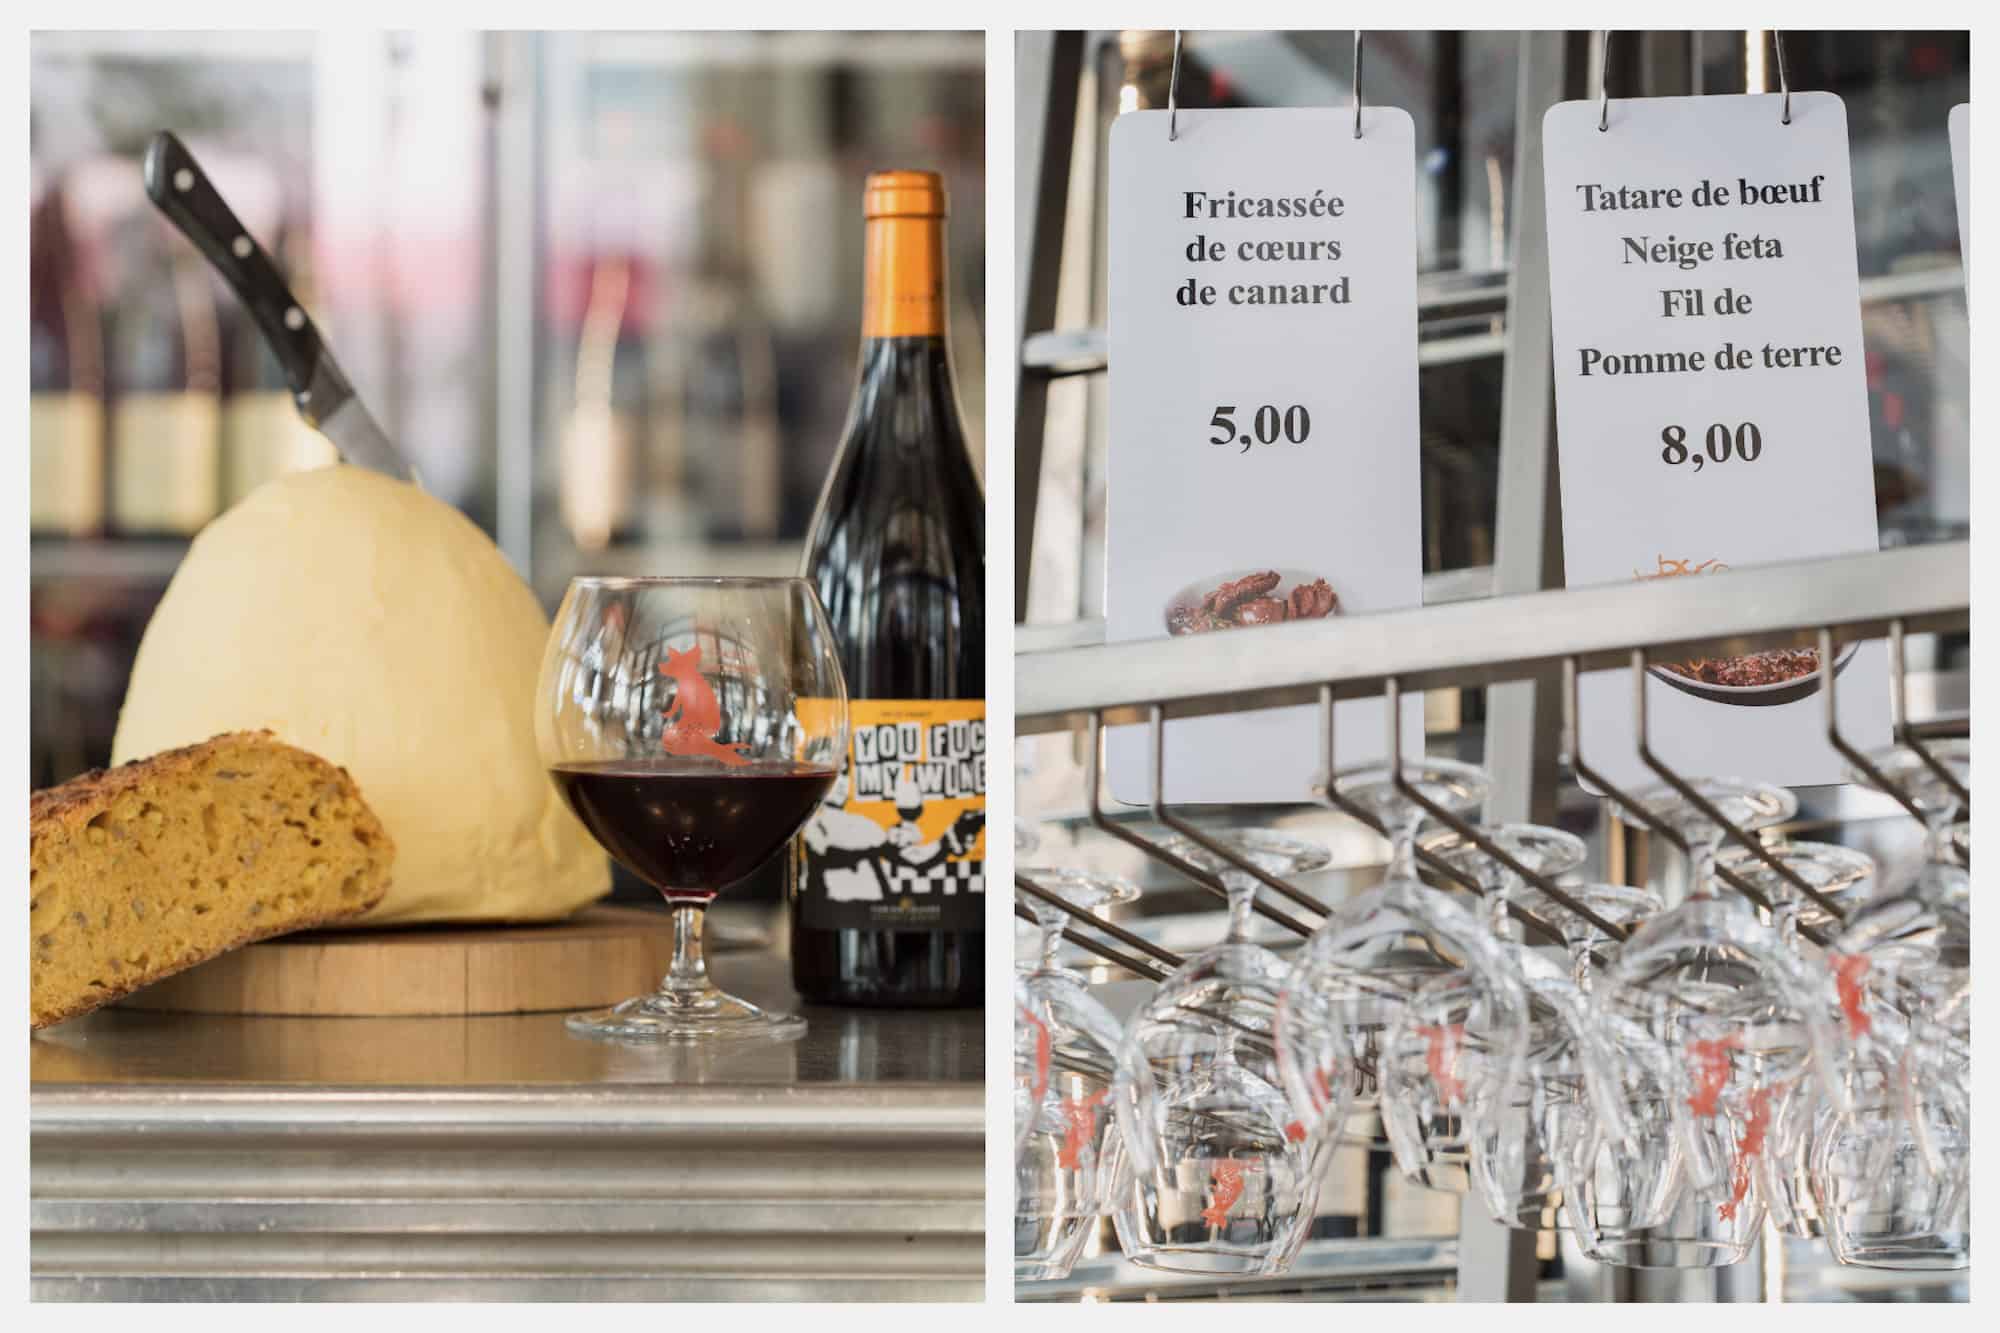 The huge handmade butter and a glass of biodynamic wine at small plates restaurant in Paris, L'Avant Comptoir du Marché (left) where the names of the dishes hang from the ceiling (right).